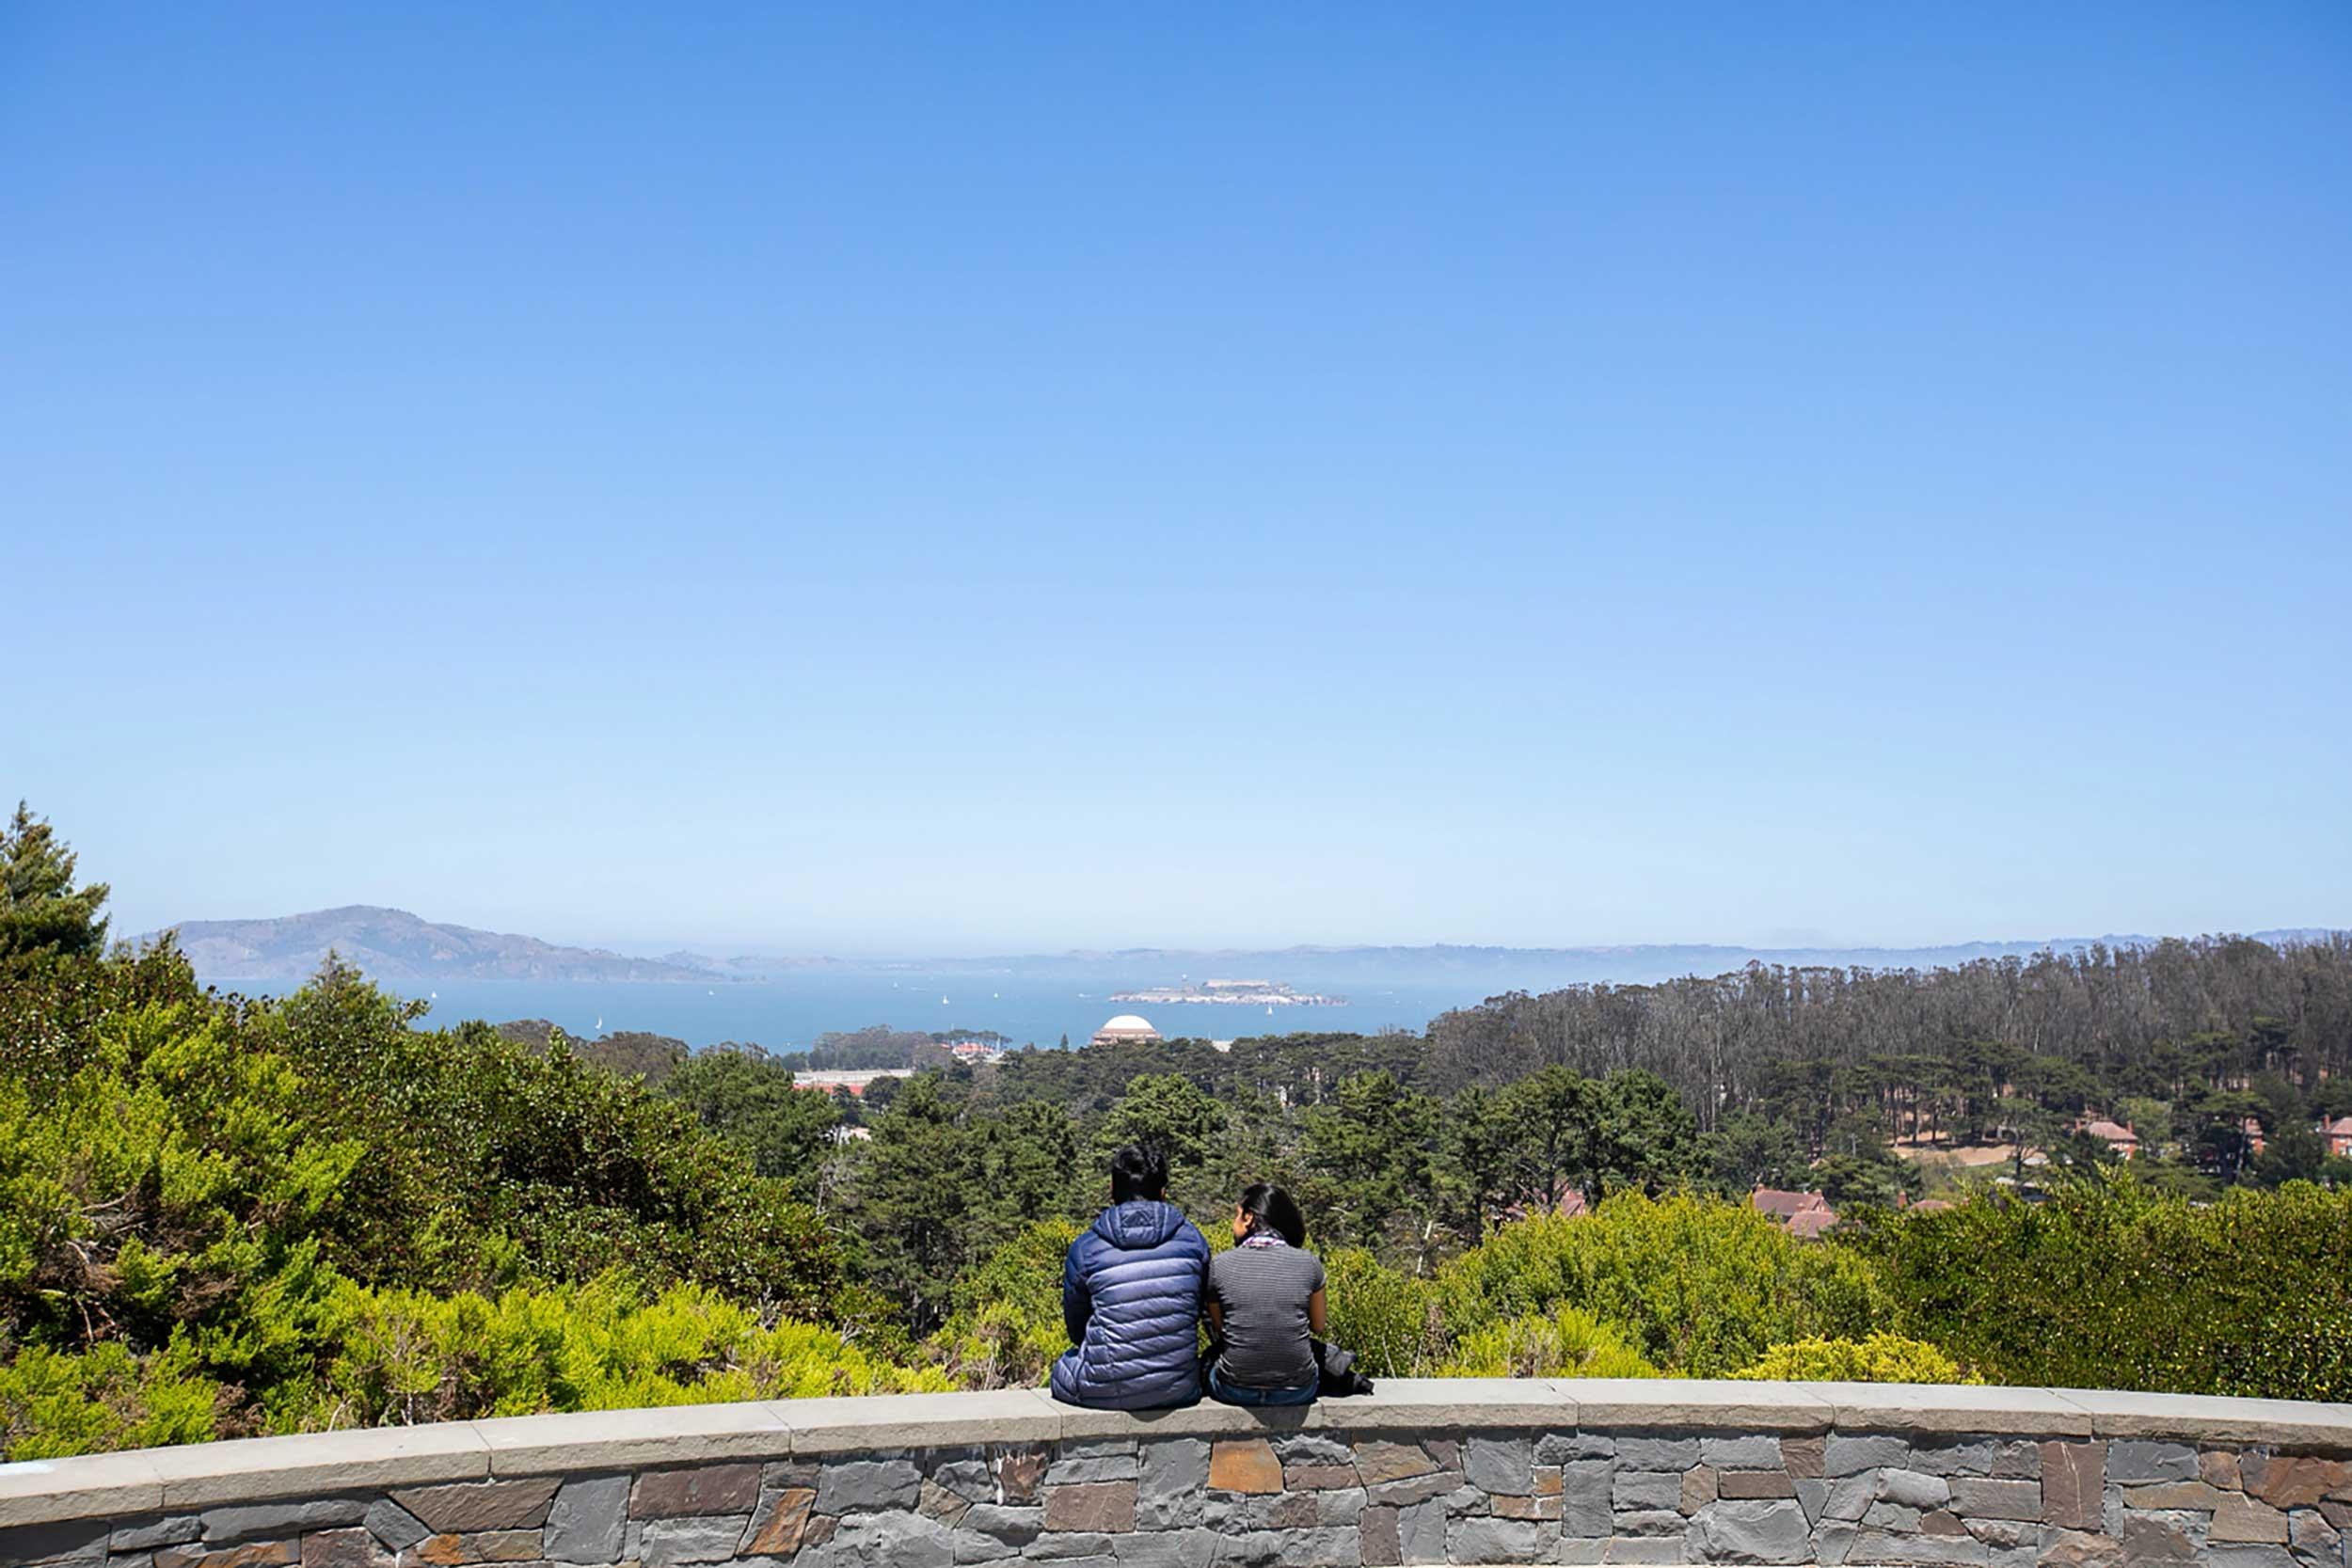 Two people taking in the view at Inspiration Point.